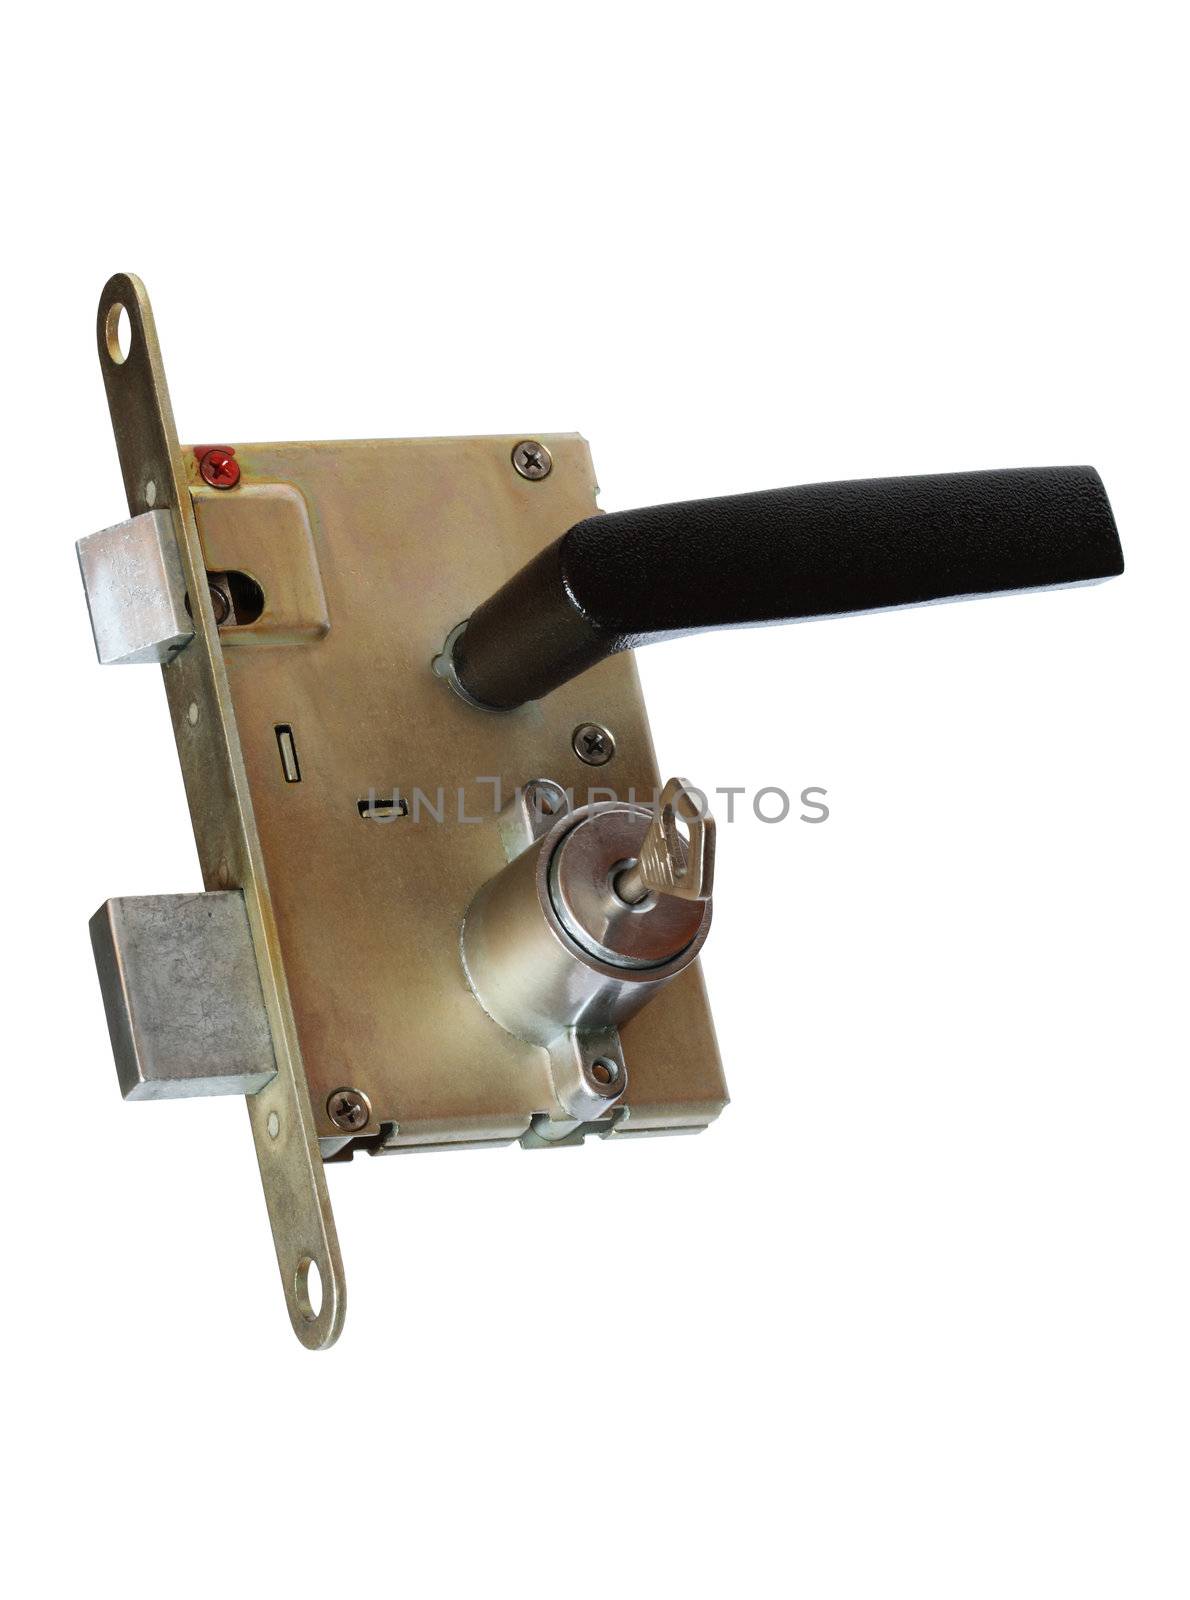 Modern door lock isolated on white background with clipping path